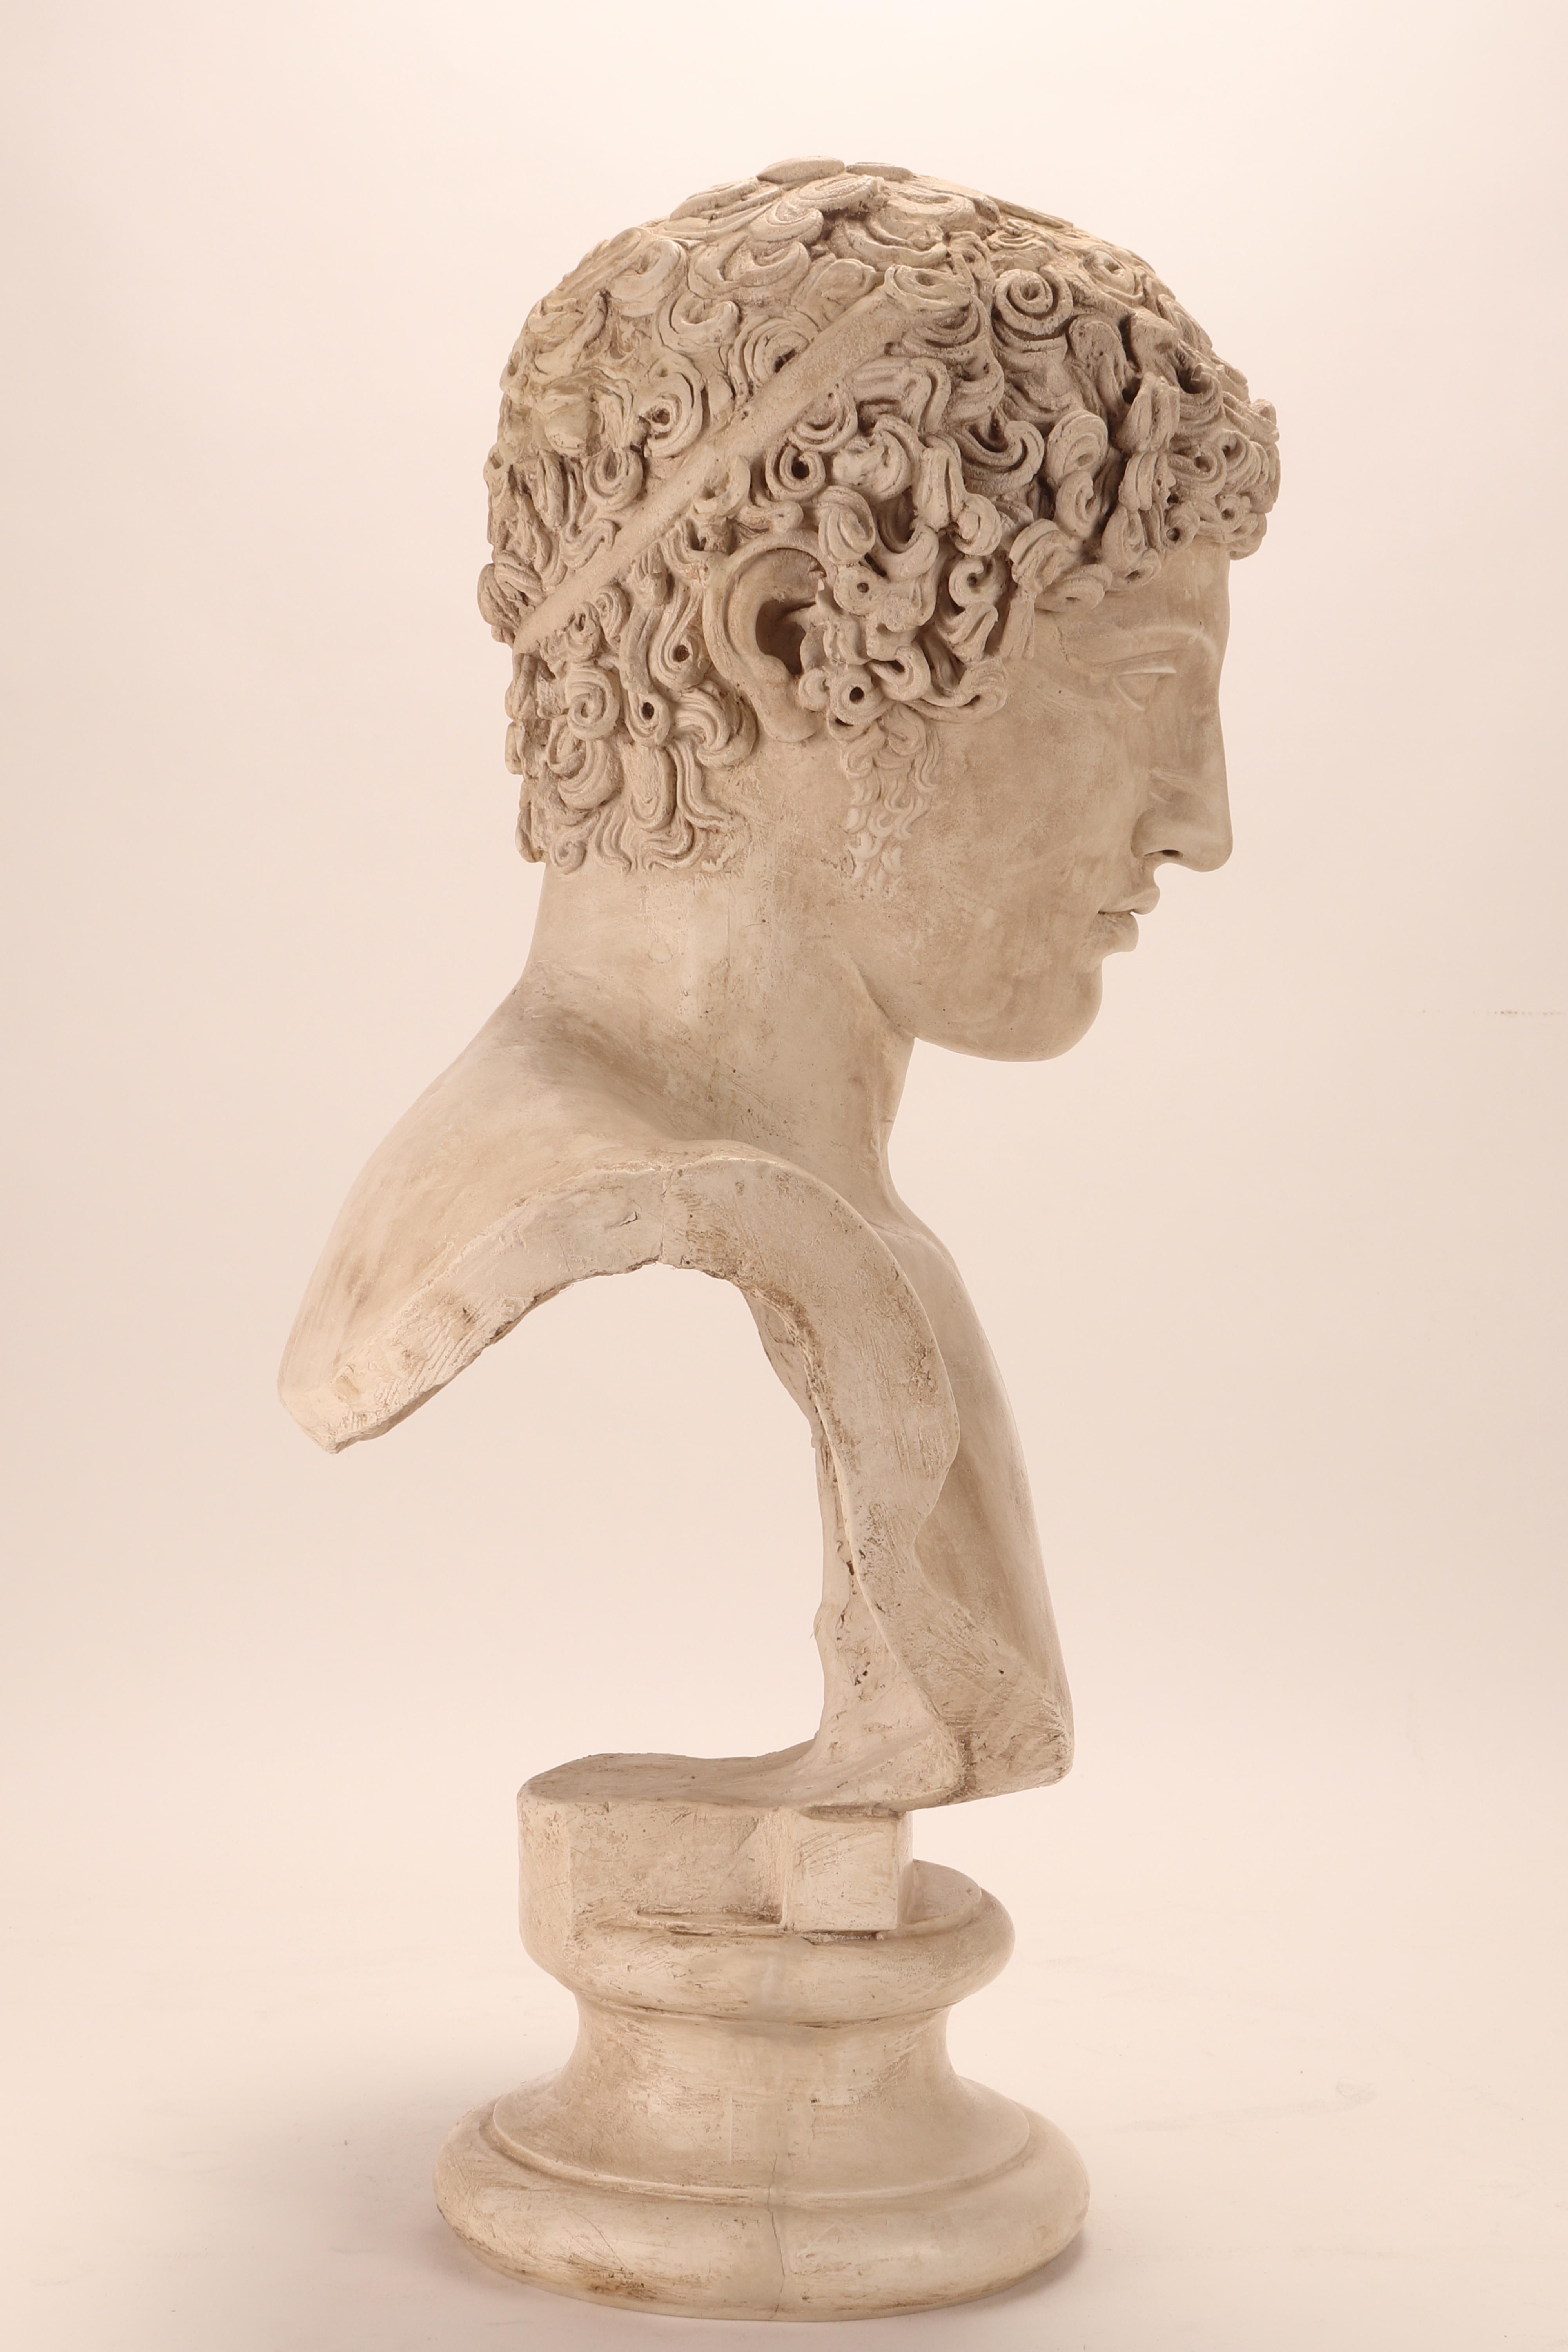 A plaster cast: the bust of Hermes, Italy 1890. Over the plaster base is set the plaster cast of the bust of Hermes. Cast for drawing teaching in Academy. Italy circa 1890. 